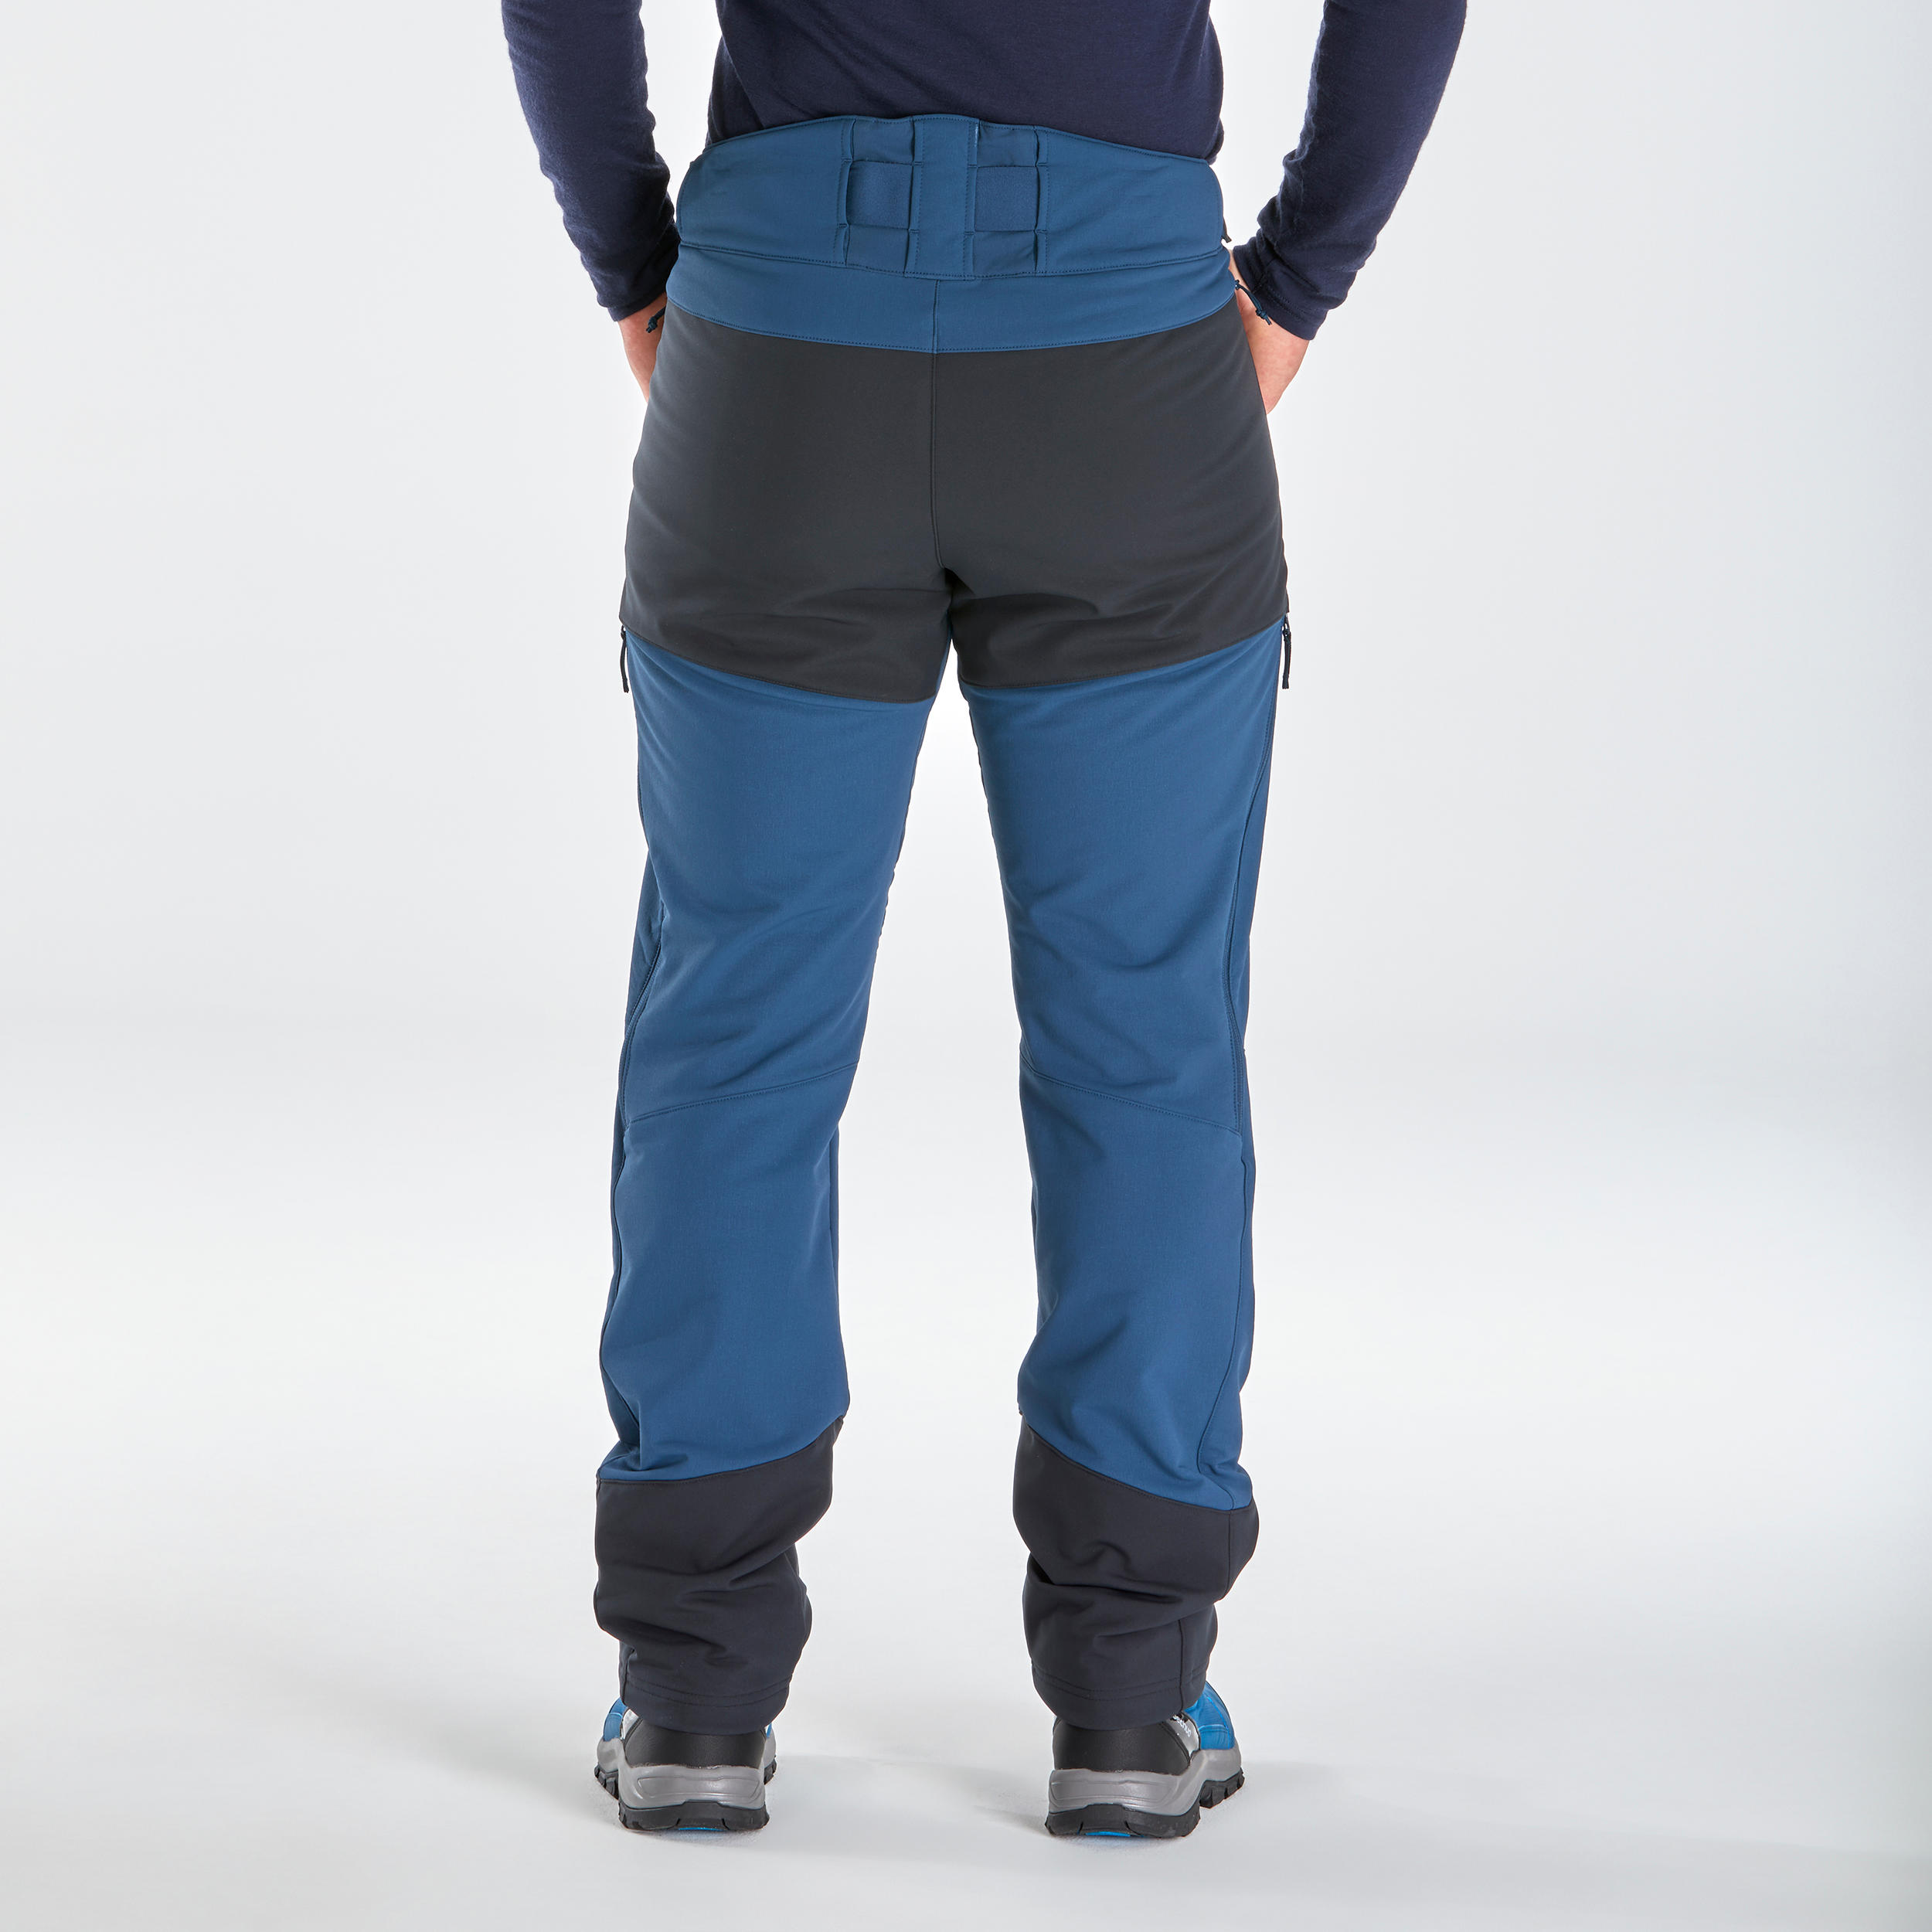 Men’s Warm Water-repellent Stretch Hiking Trousers with Gaiters - SH520 X-WARM   6/6